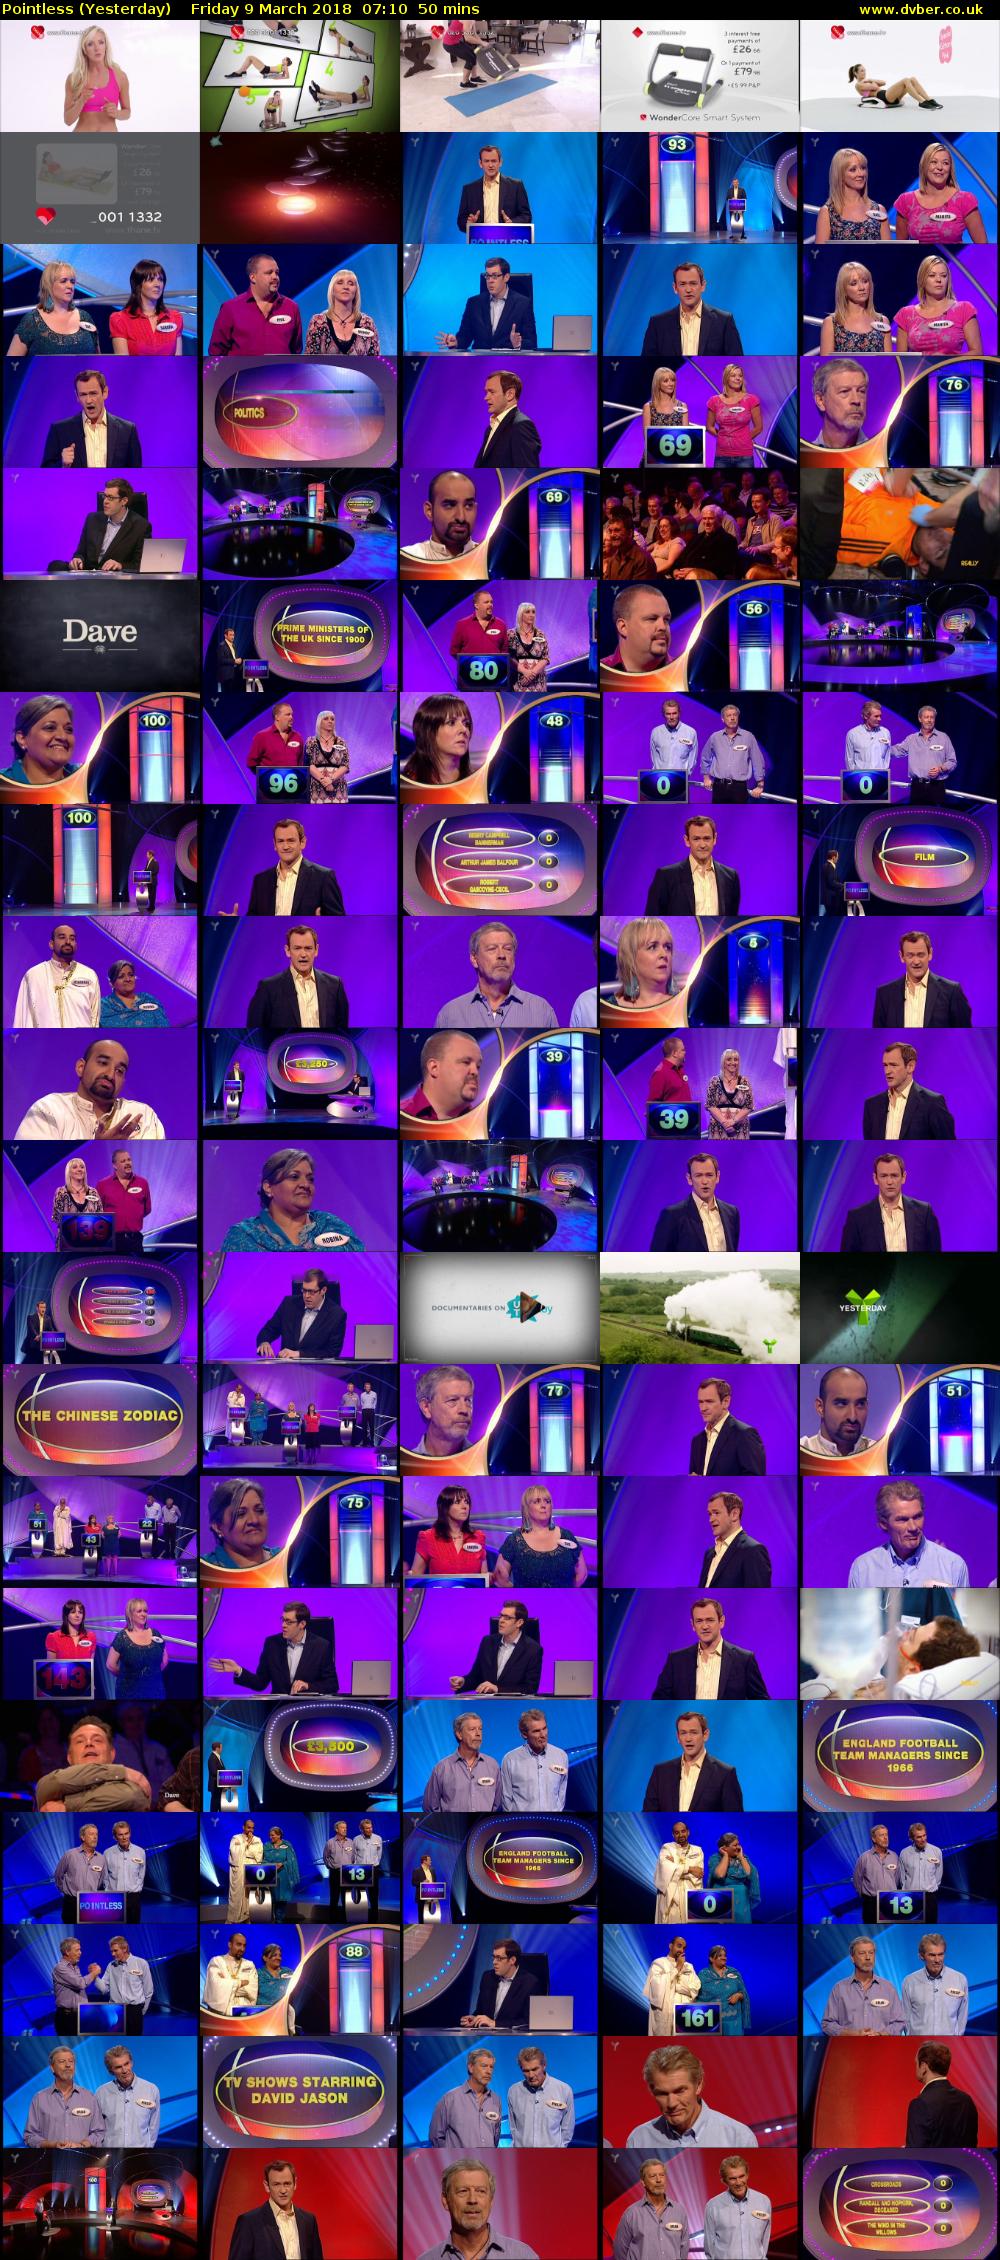 Pointless (Yesterday) Friday 9 March 2018 07:10 - 08:00